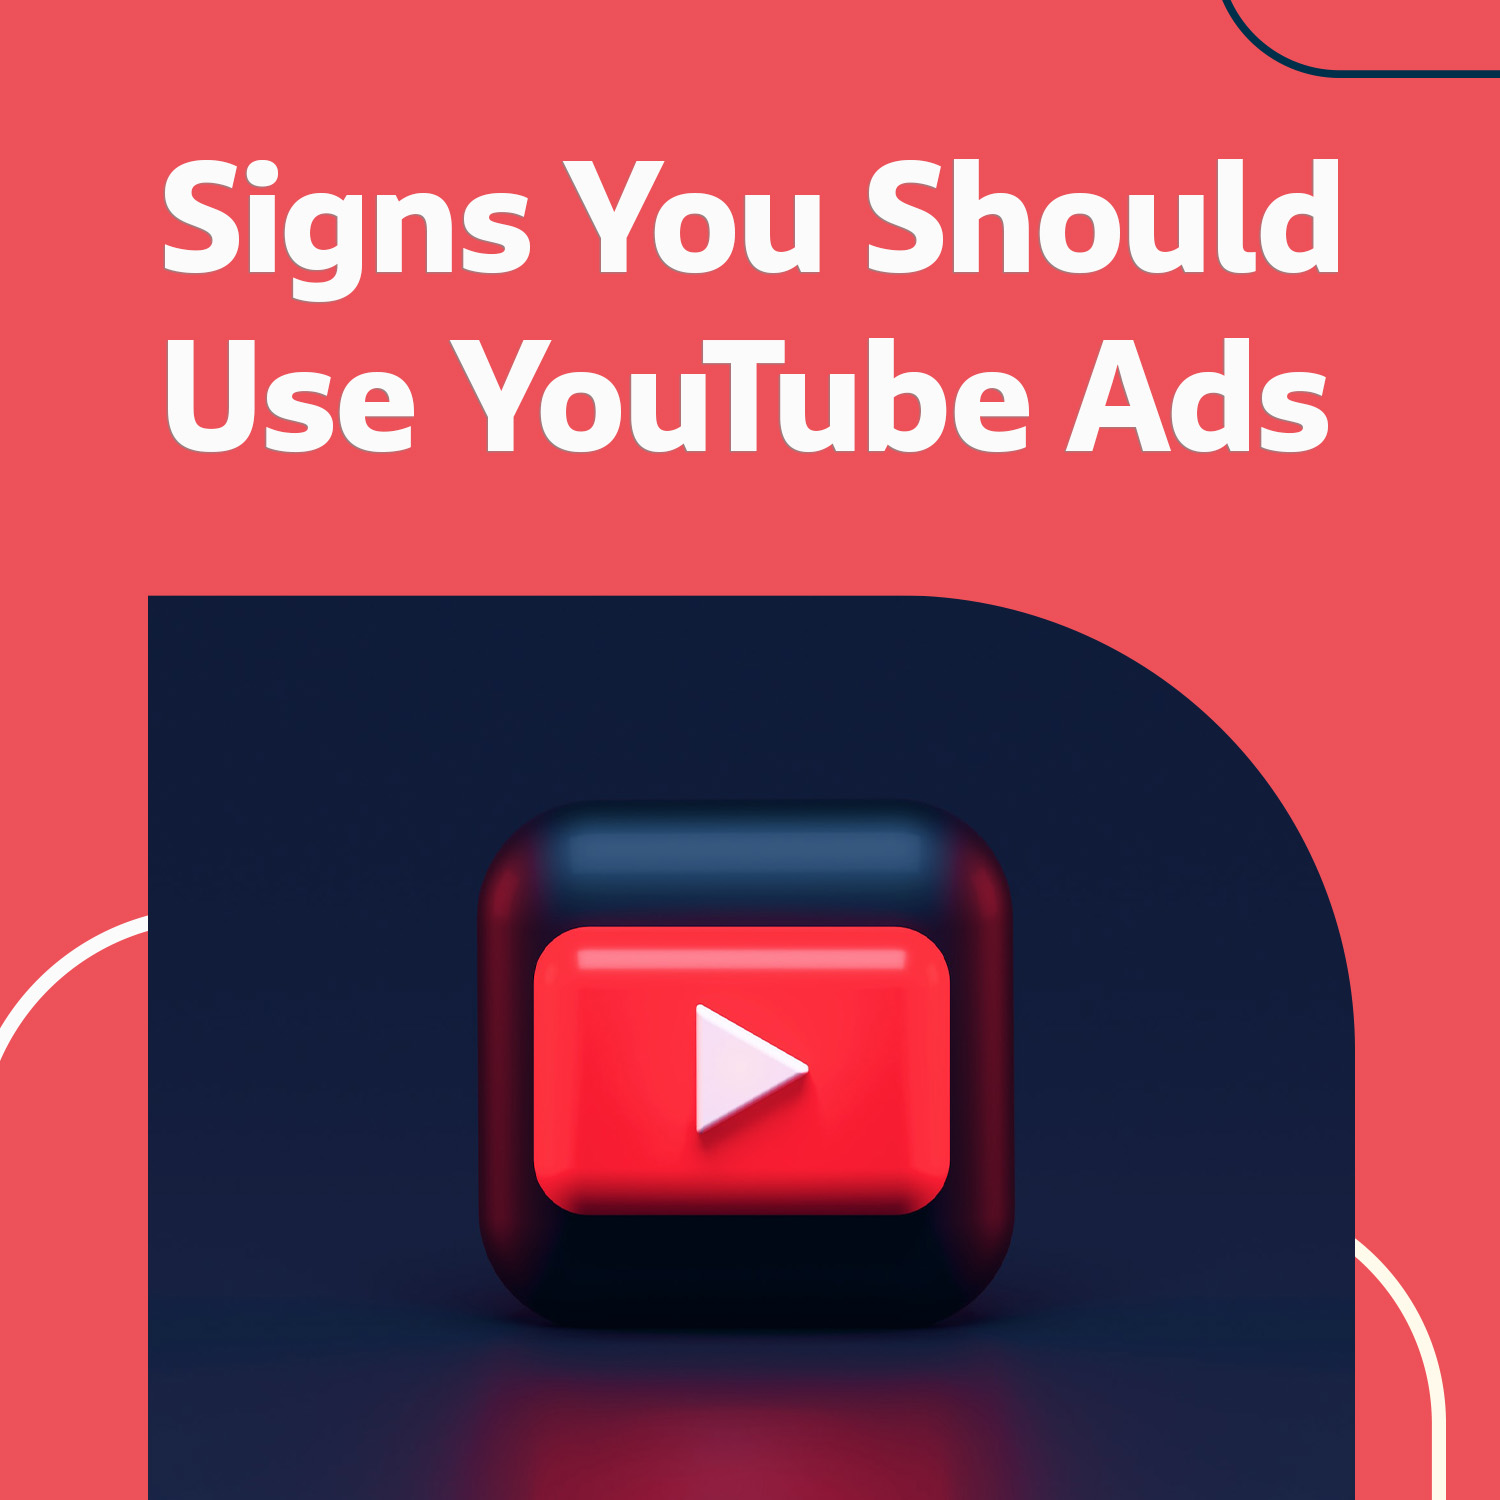 Signs You Should Use YouTube Ads